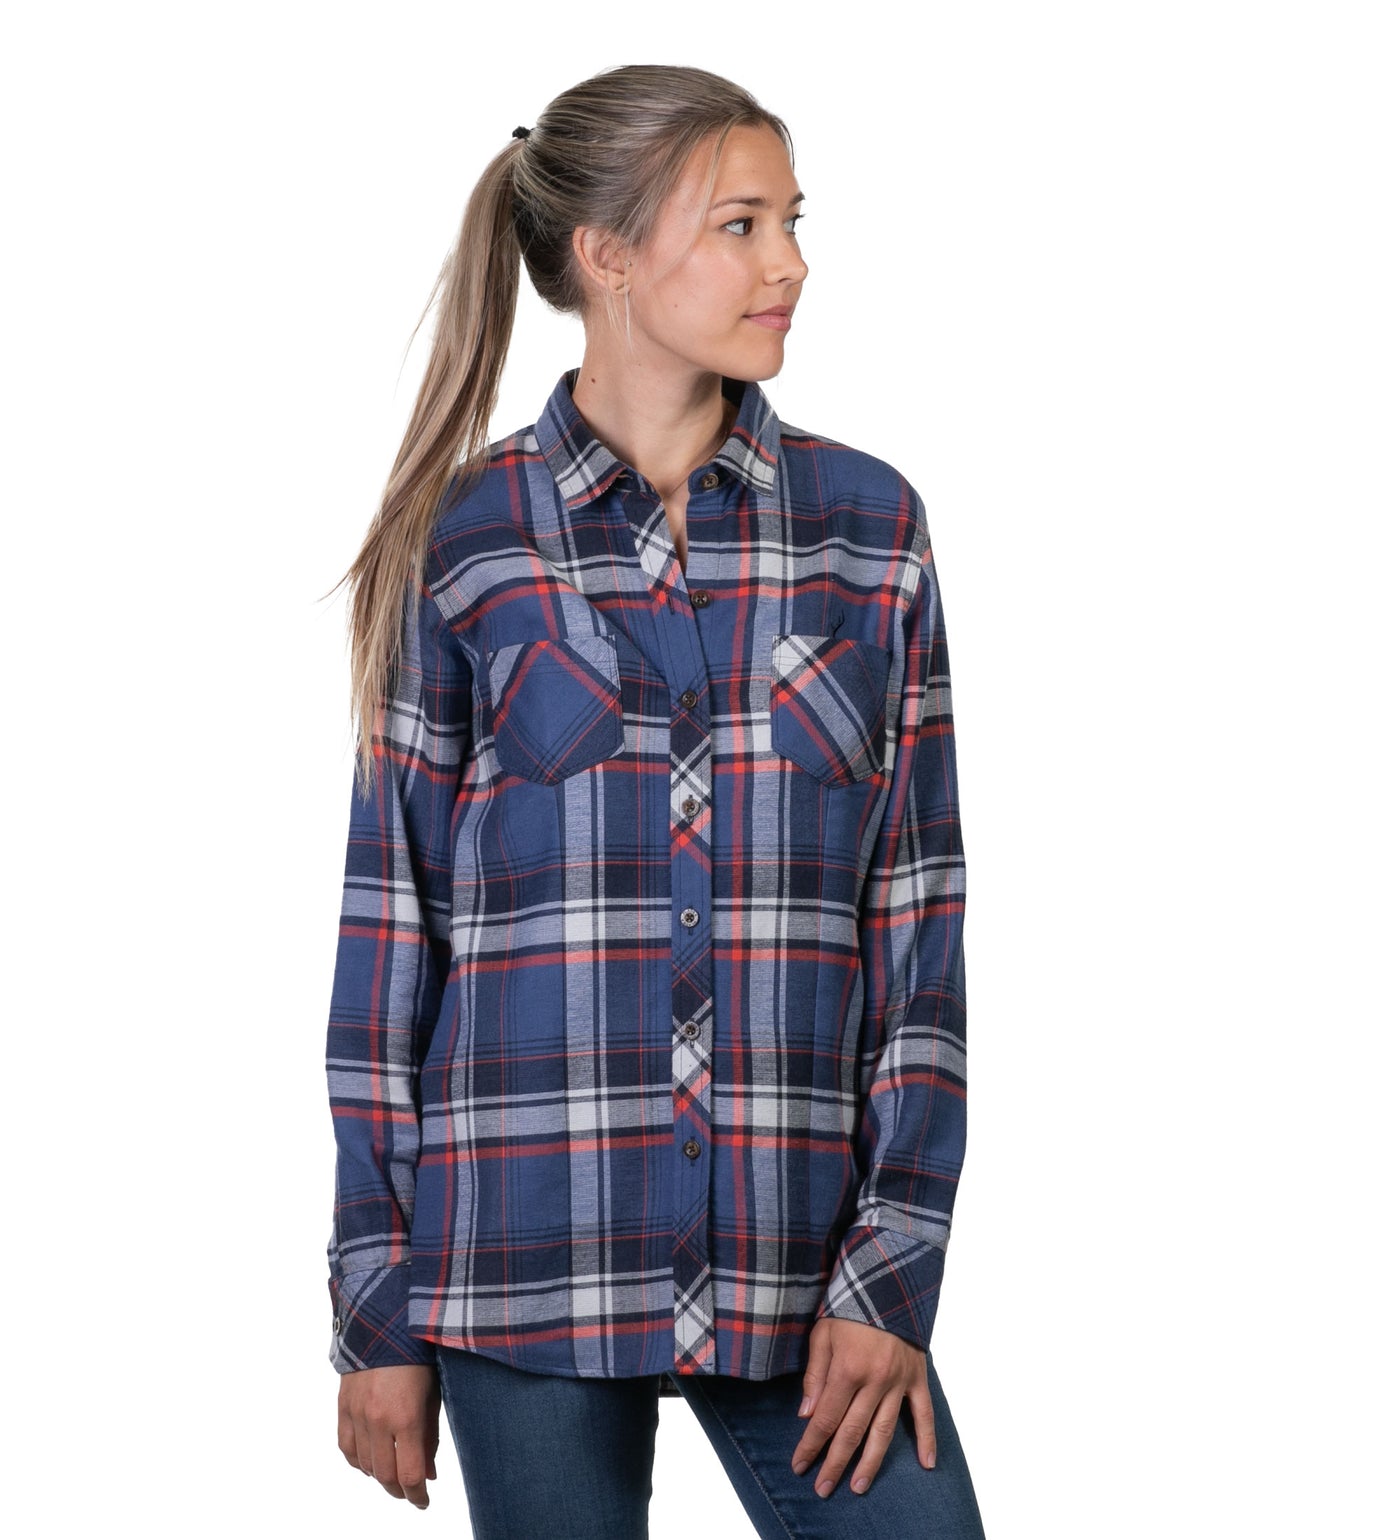 Women's Peregrine Every Day Double Weave Shirt- Sunset Blue